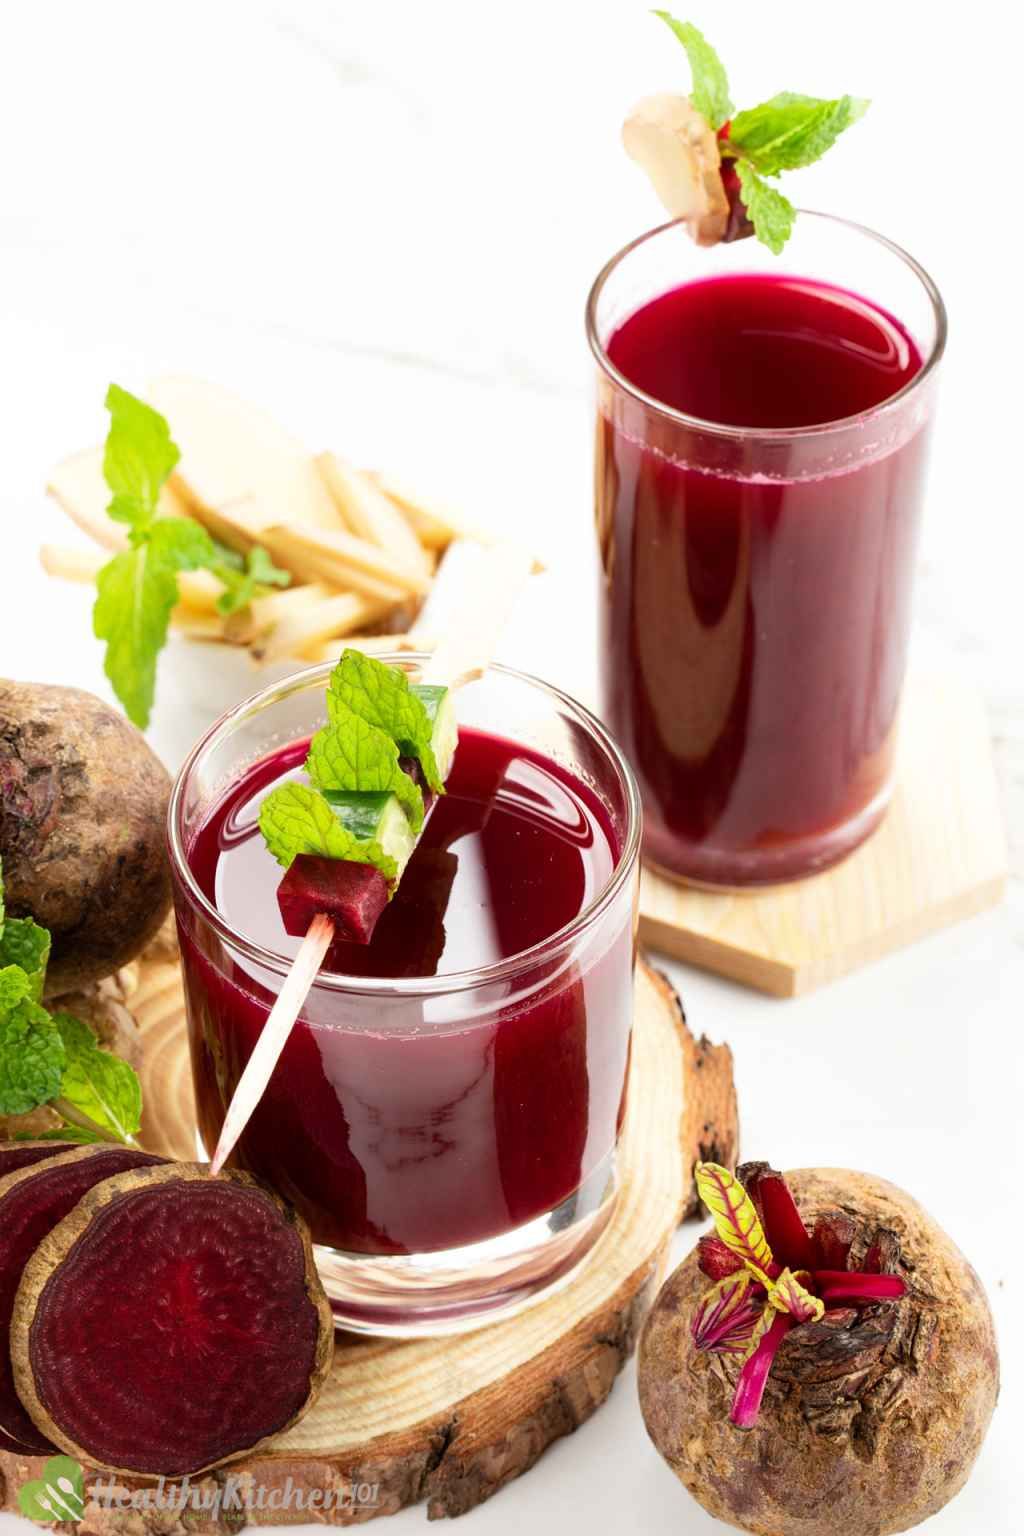 Carrot Beet Juice Recipe: A Healthy Beverage to Promote Heart Health